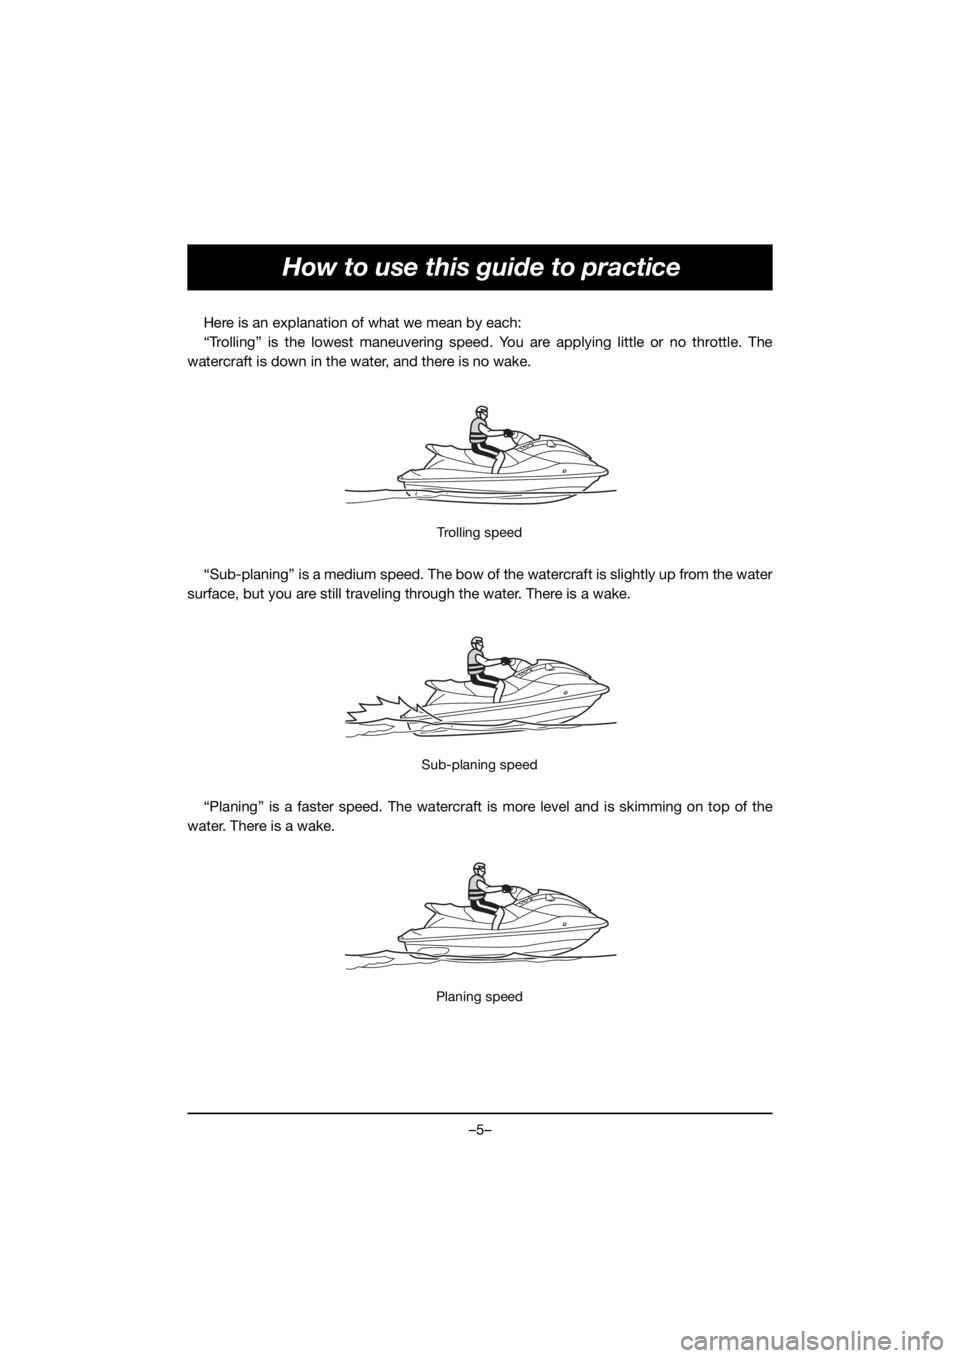 YAMAHA VX-C 2021  Bruksanvisningar (in Swedish) –5–
How to use this guide to practice
Here is an explanation of what we mean by each:
“Trolling” is the lowest maneuvering speed. You are applying little or no throttle. The
watercraft is down